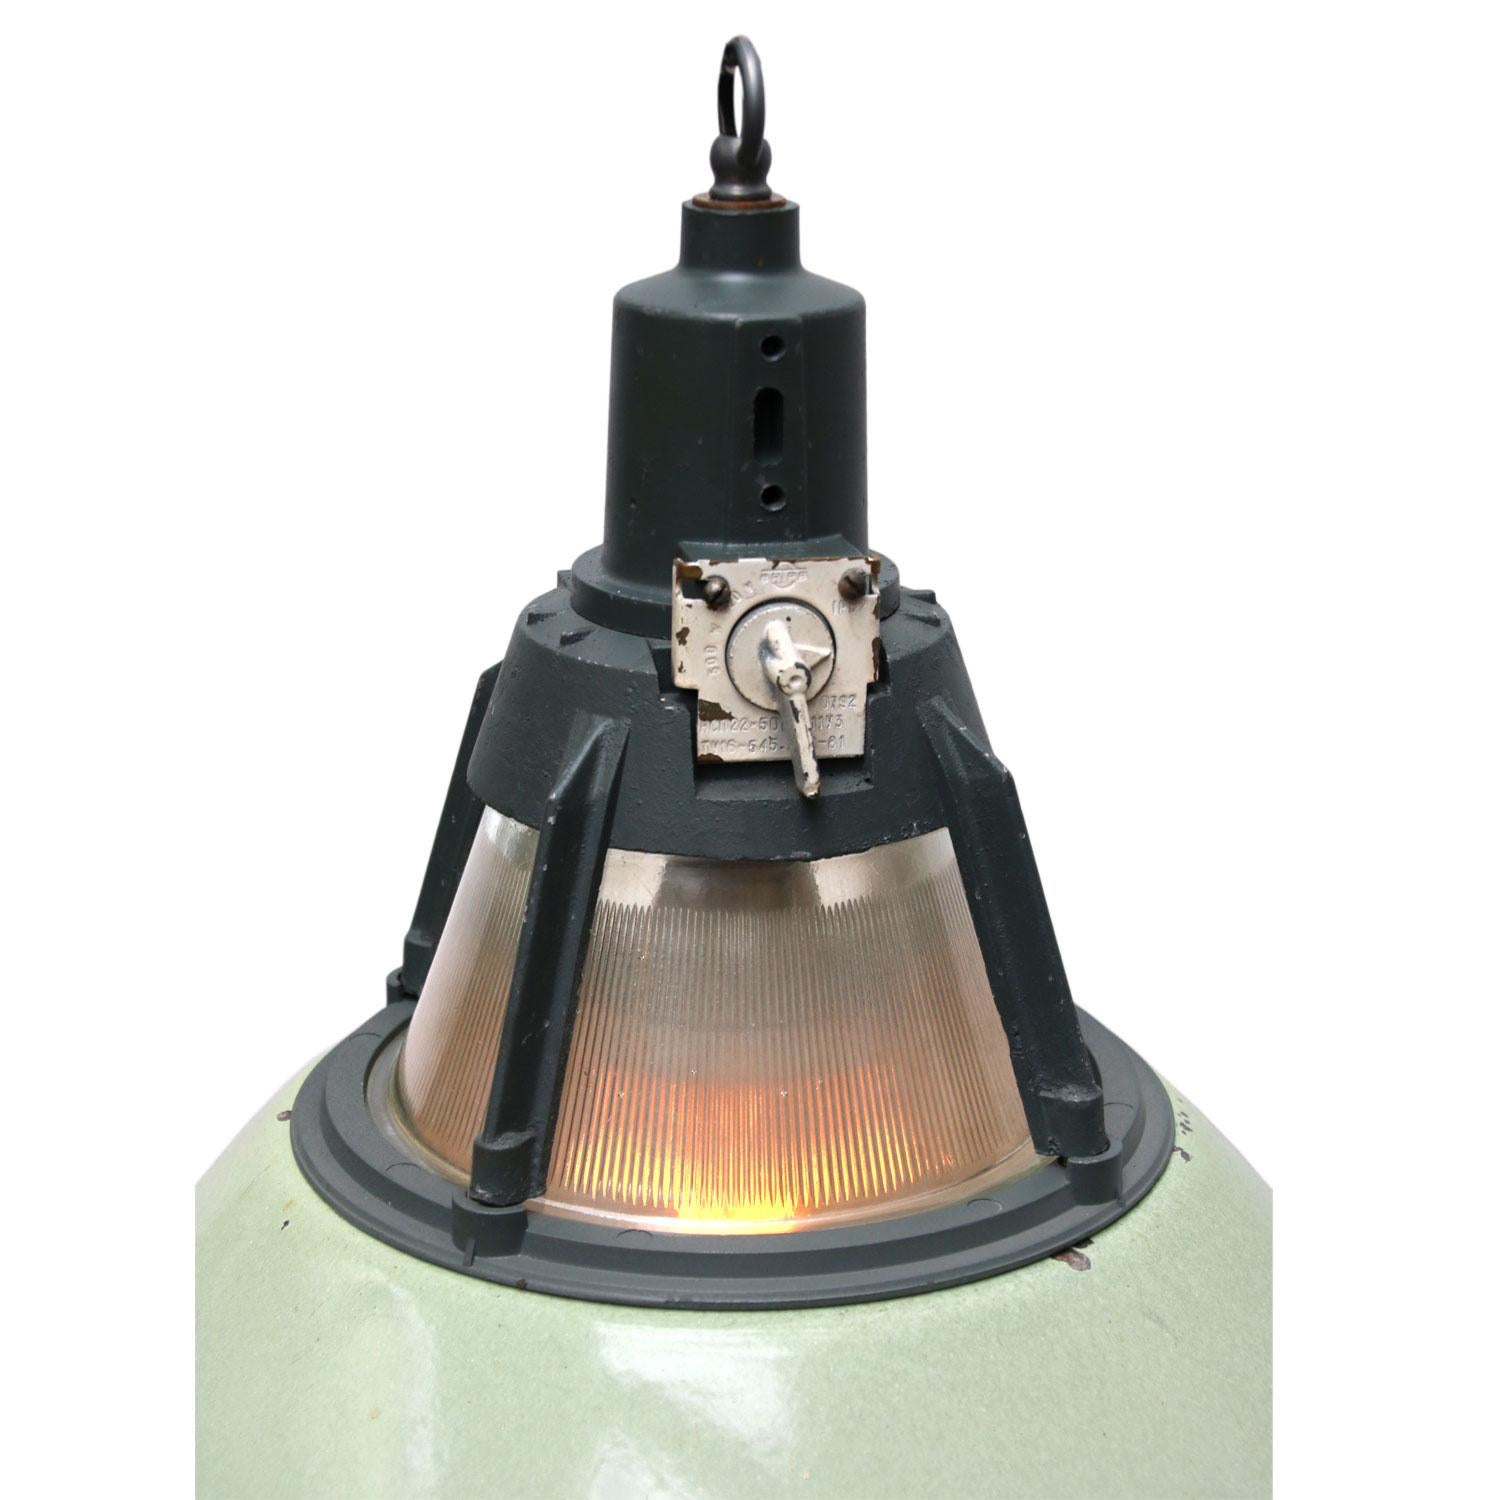 Enamel Industrial pendant. Green enamel shade, white inside.
Dark grey/green cast aluminium top.

Weight: 3.5 kg / 7.7 lb

All lamps have been made suitable by international standards for incandescent light bulbs, energy-efficient and LED bulbs.